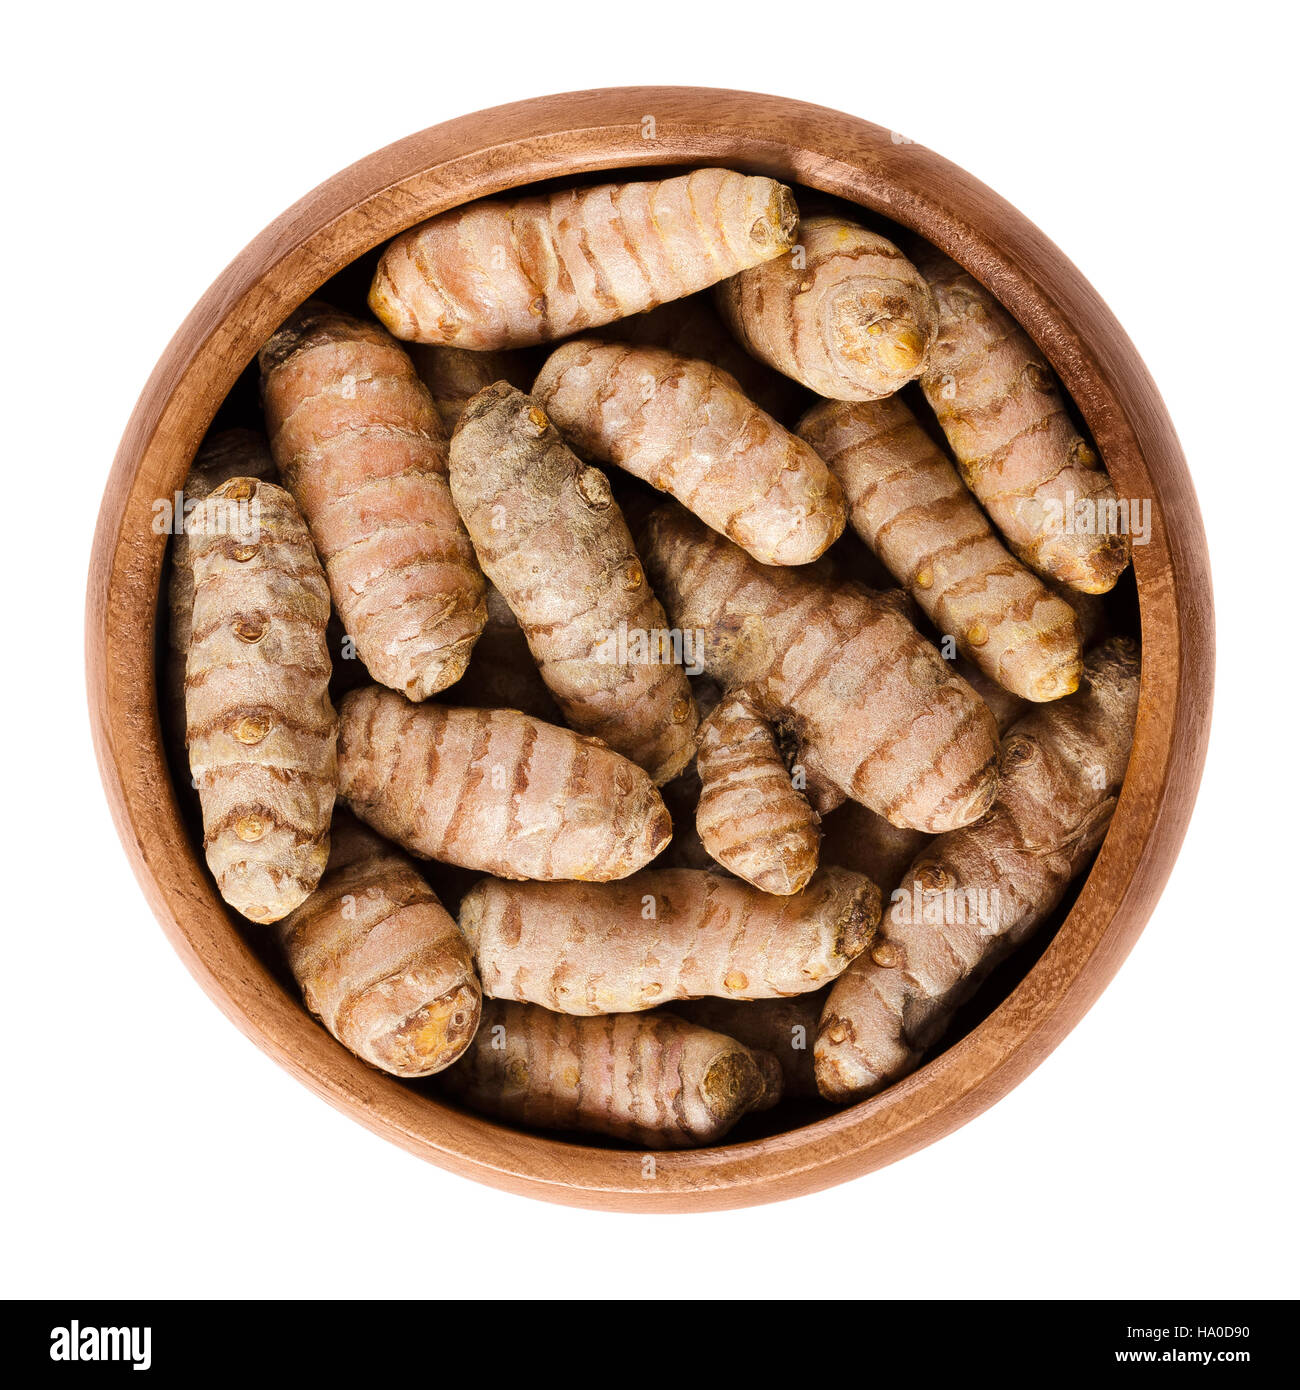 Fresh turmeric rhizomes in wooden bowl. Curcuma longa, also tumeric, used as spice for curries, for mustards and medicine. Stock Photo